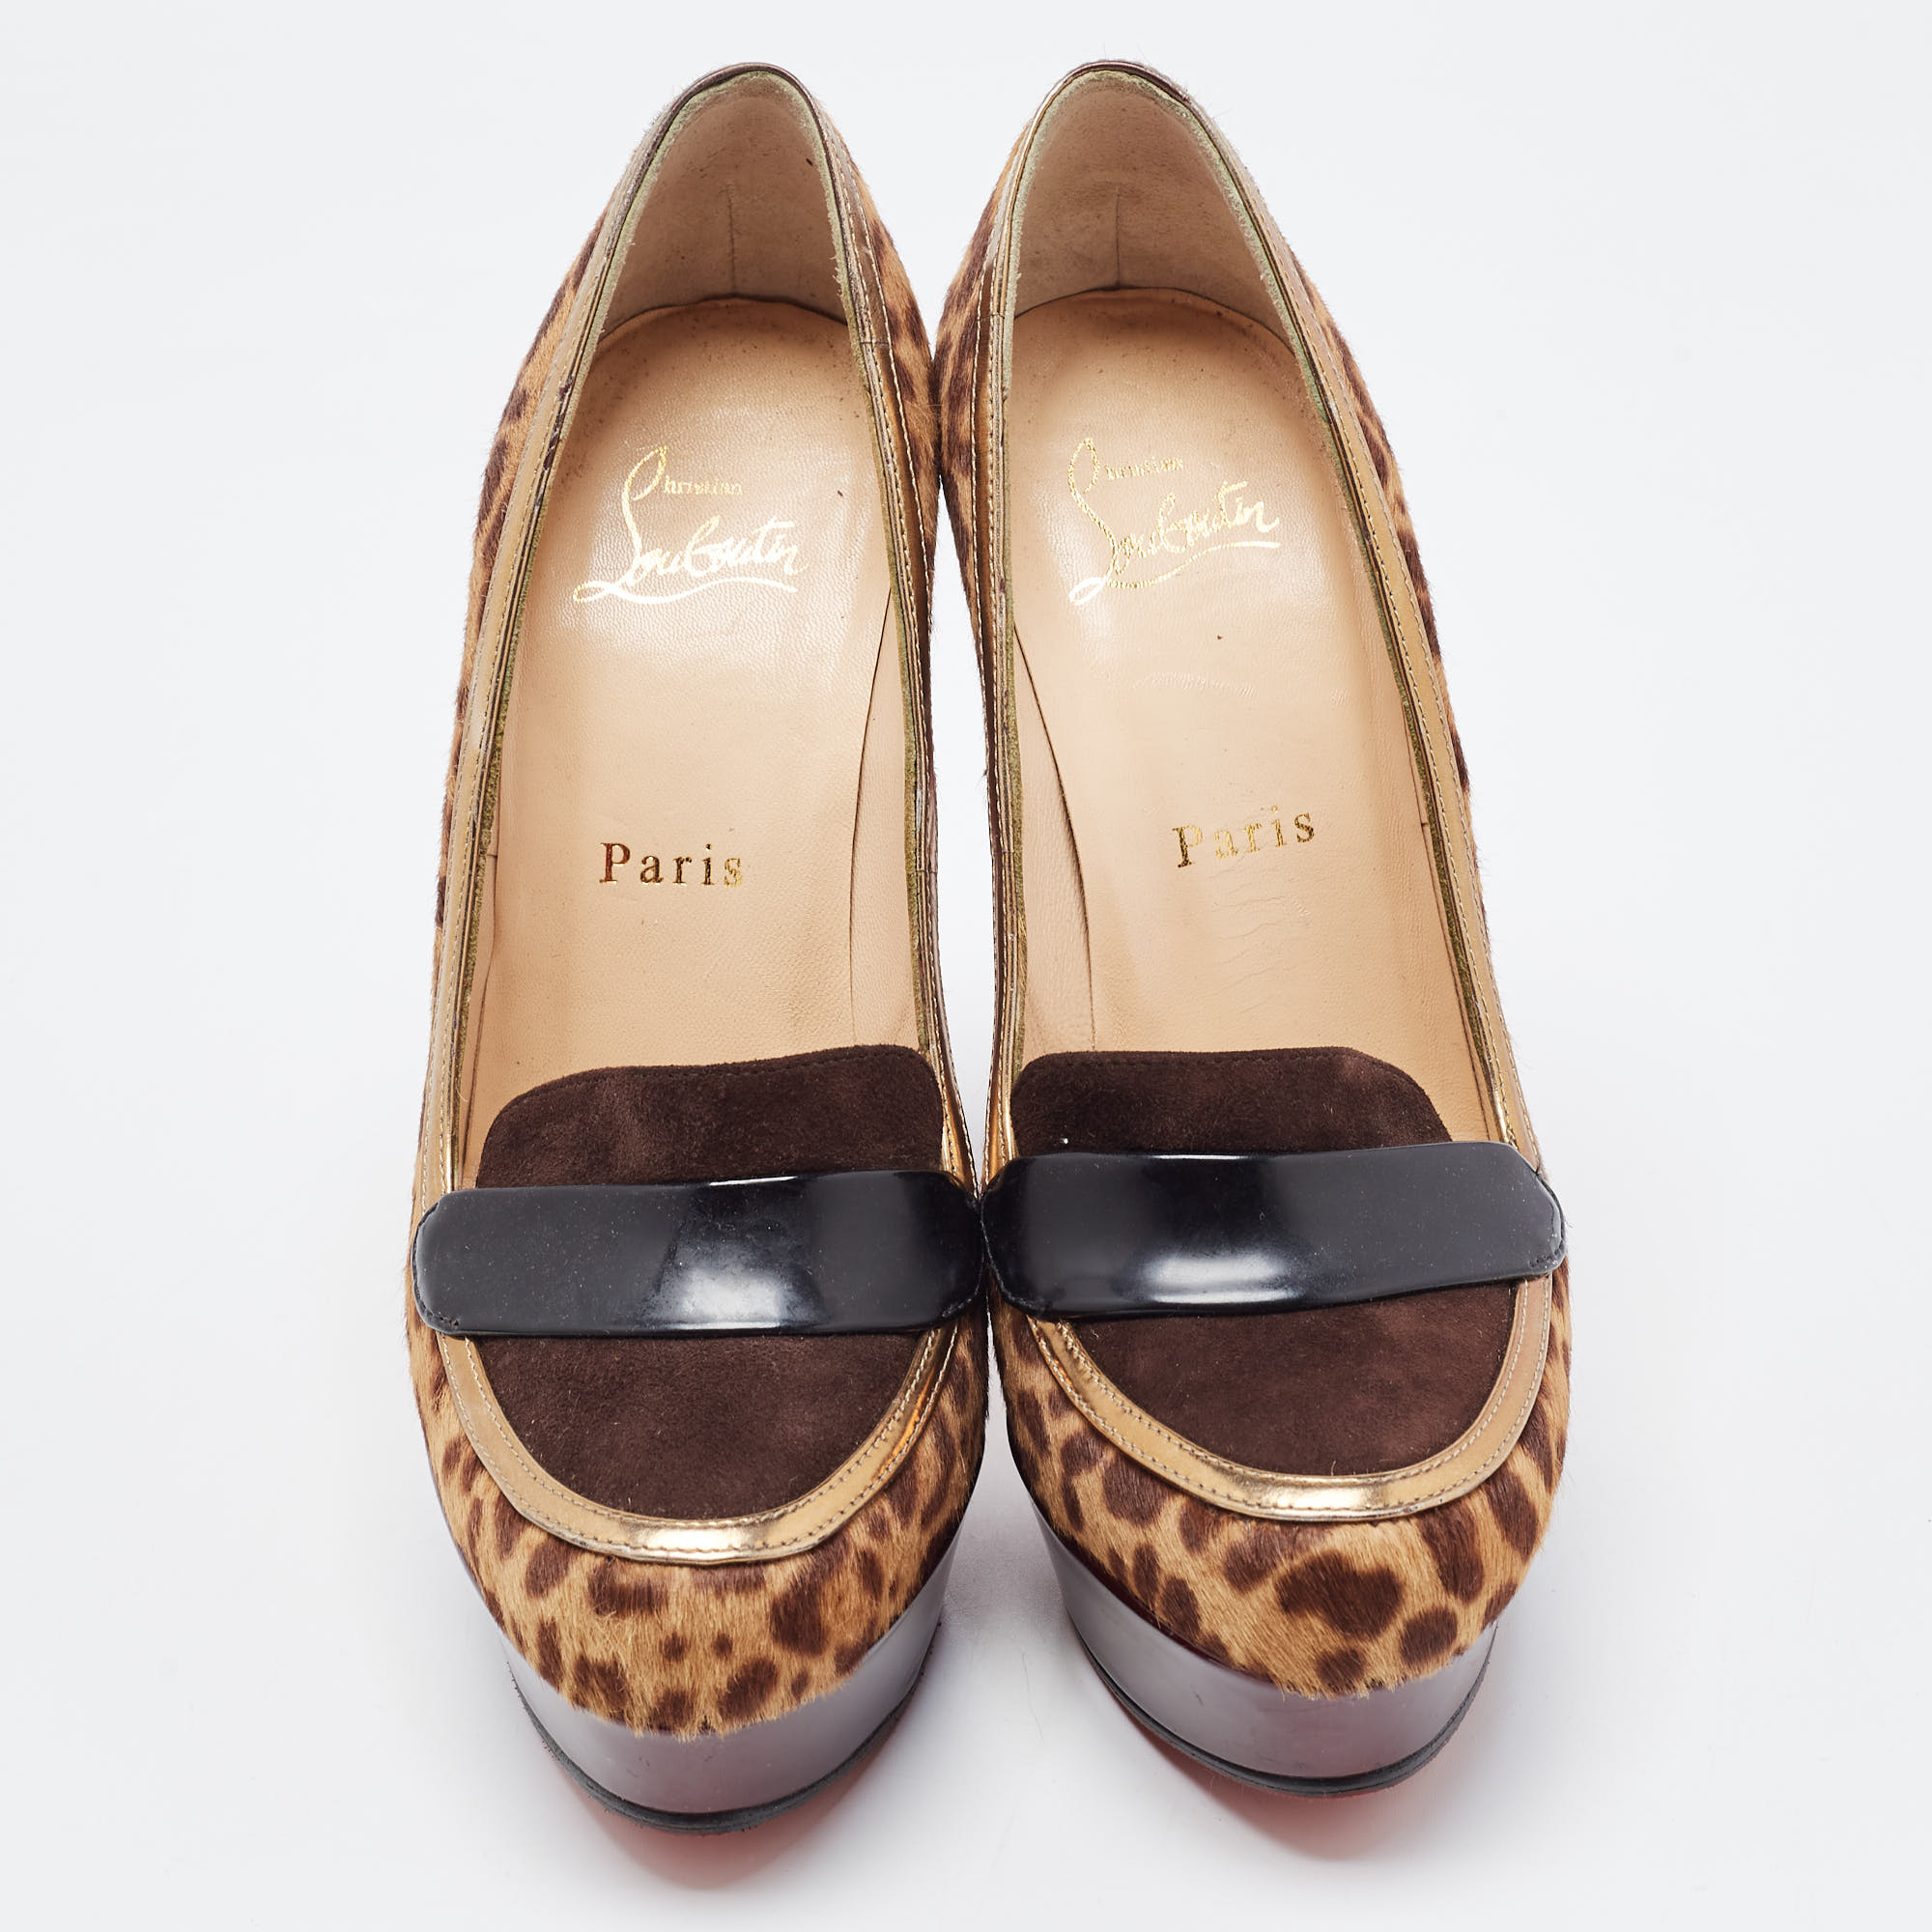 Christian Louboutin Tricolor Animal Print Calf Hair And Suede Platform Loafer Pumps Size 36